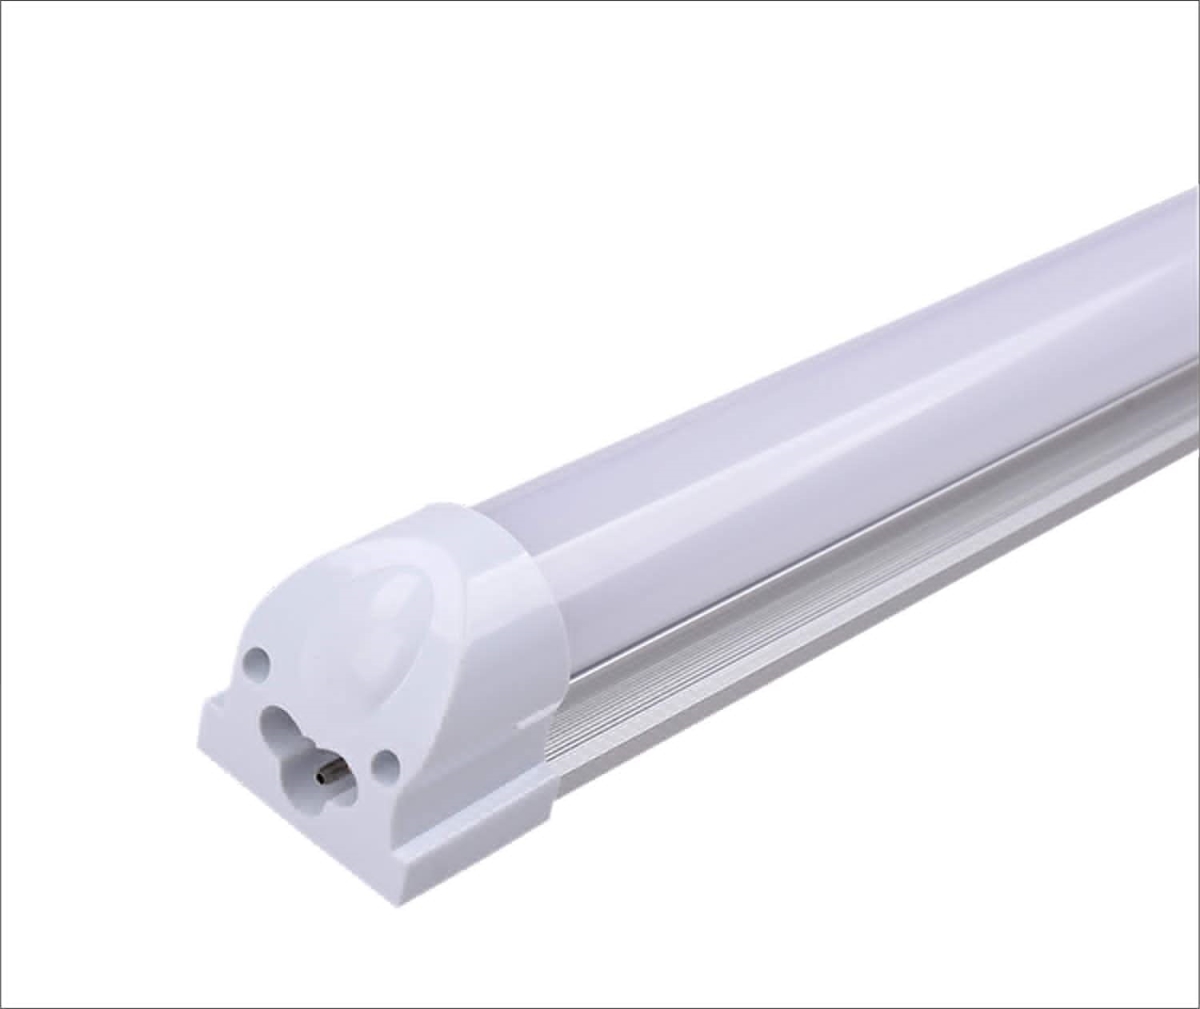 Picture of Toggled 104496 4 ft. 4000k Designed to Replace Fluorescents LED Tube Light - Pack of 2